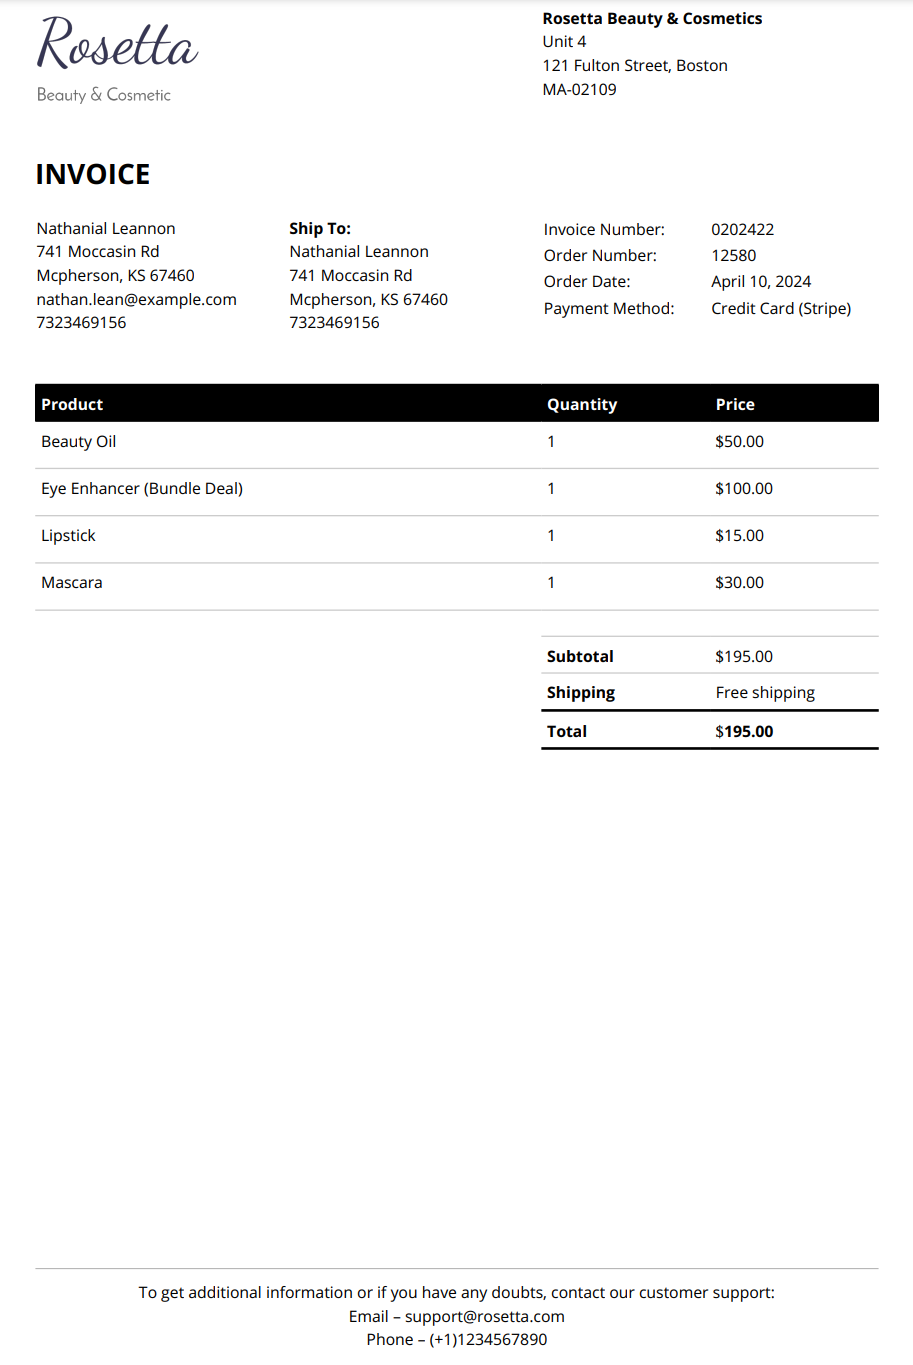 Complete PDF invoice for this order